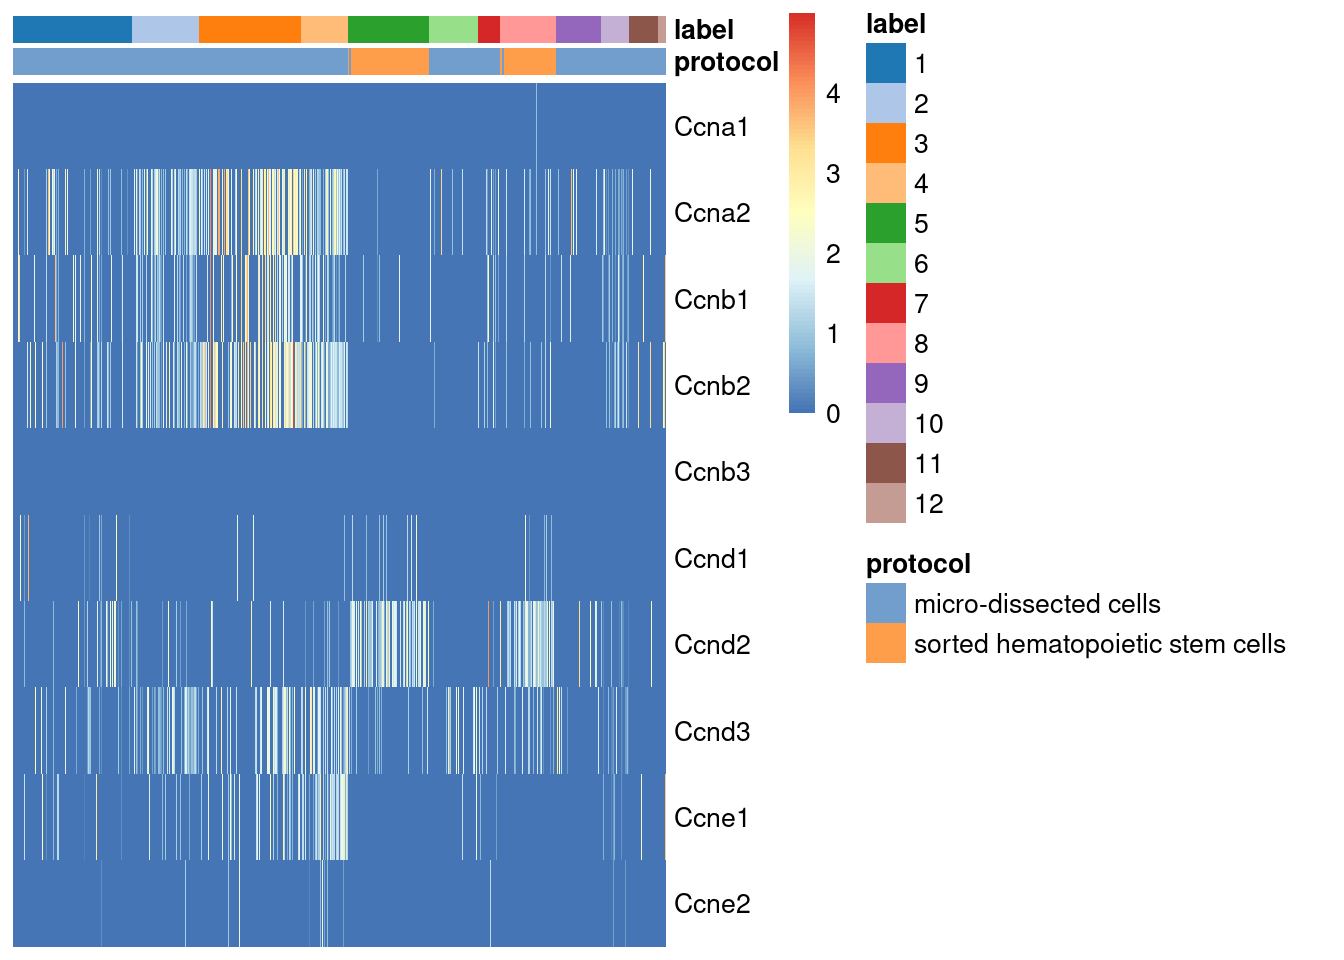 Heatmap of the log-normalized expression values of the cyclin genes in the Grun HSC dataset. Each column represents a cell that is sorted by the cluster of origin and extraction protocol.